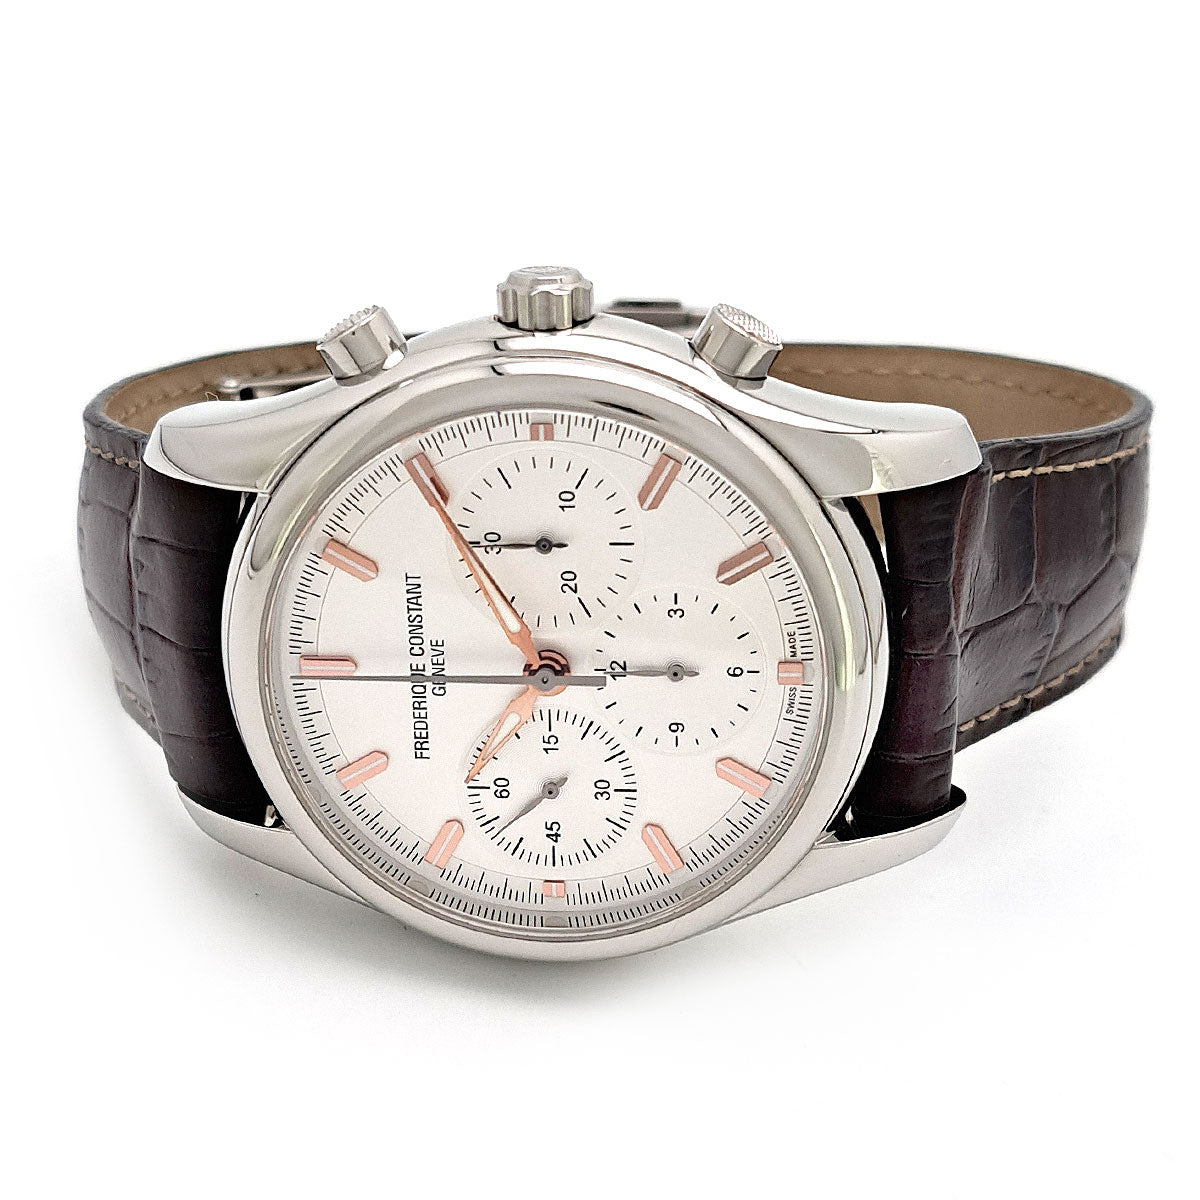 Frederique Constant Chronograph From Beijing to Paris Automatic Stainless Steel Men's Watch FC396X6B6